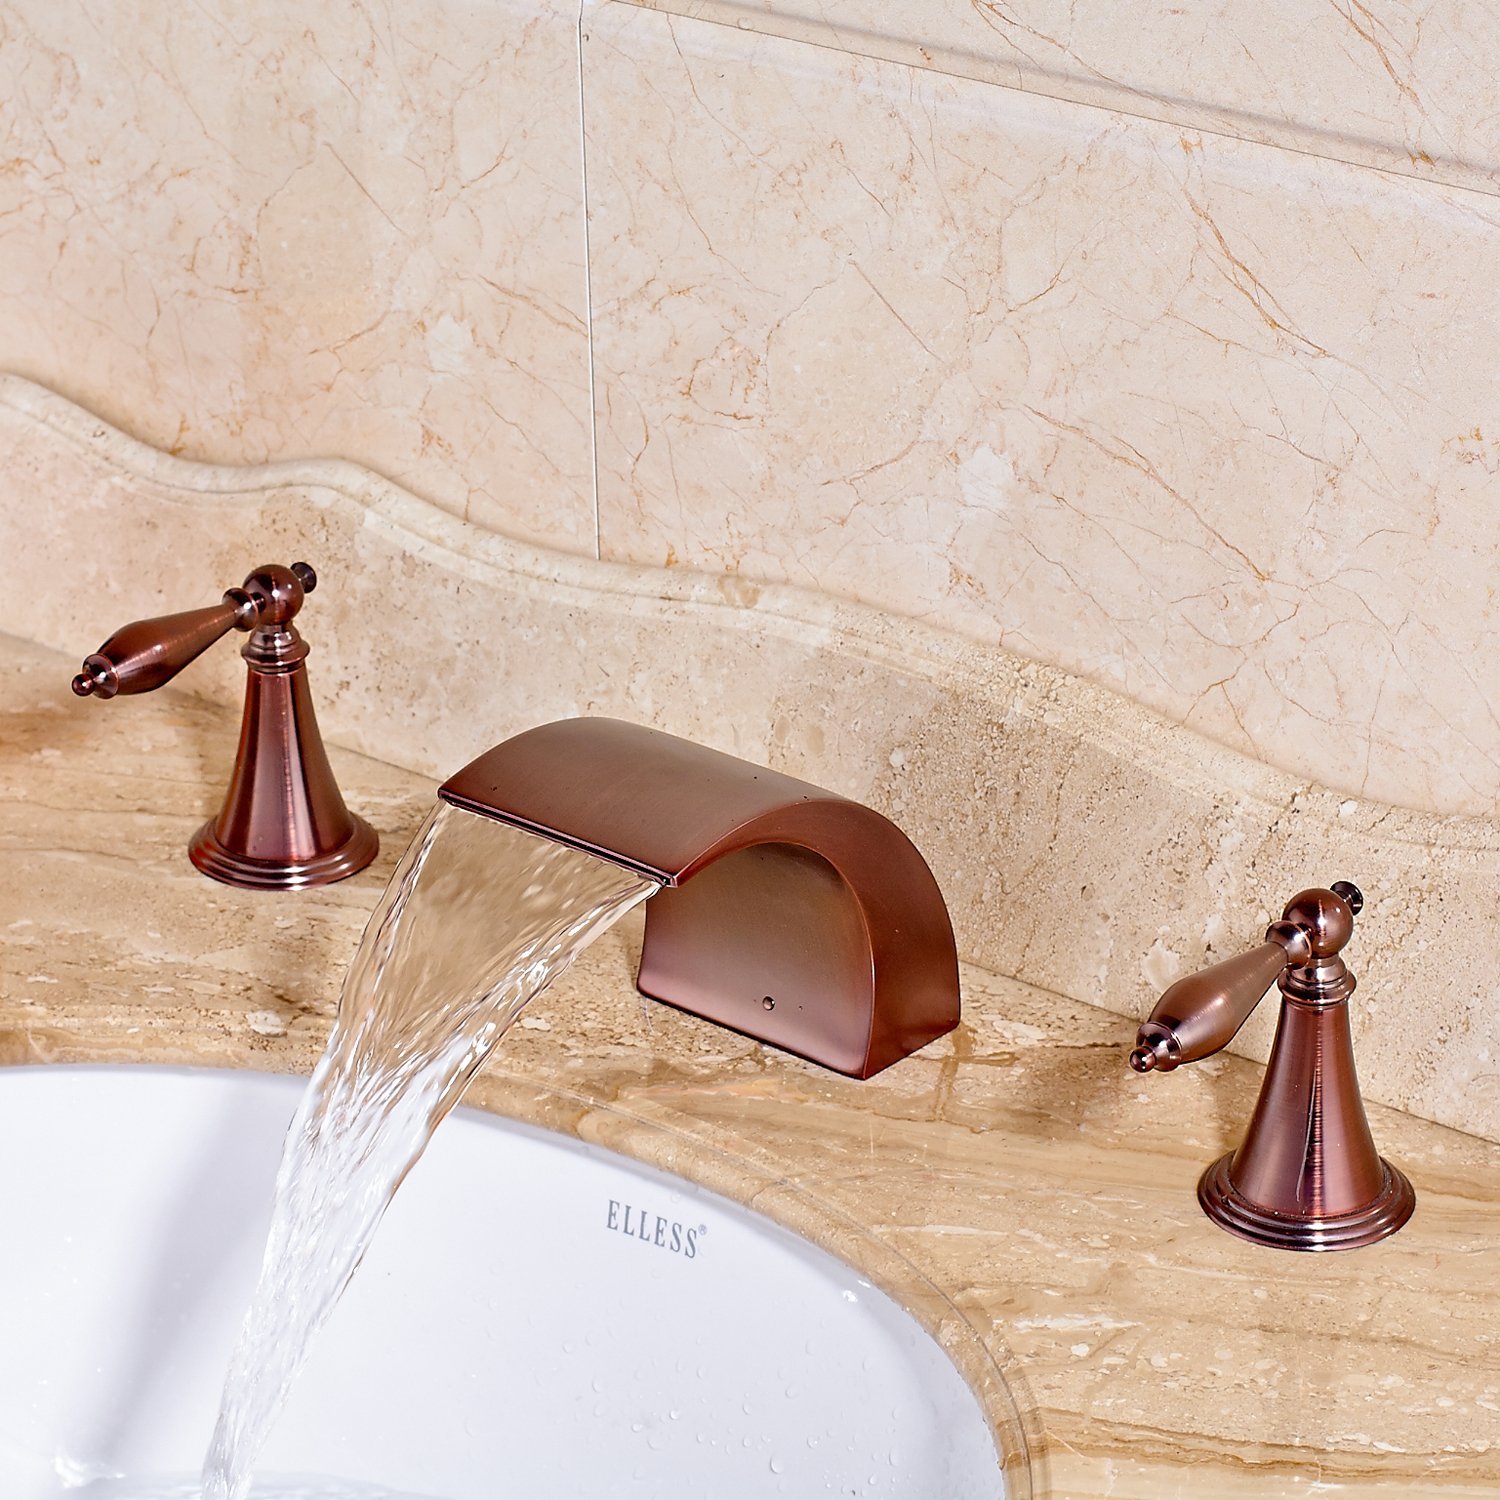 Belem Copper Finish Dual Handle Widespread Waterfall Sink Faucet